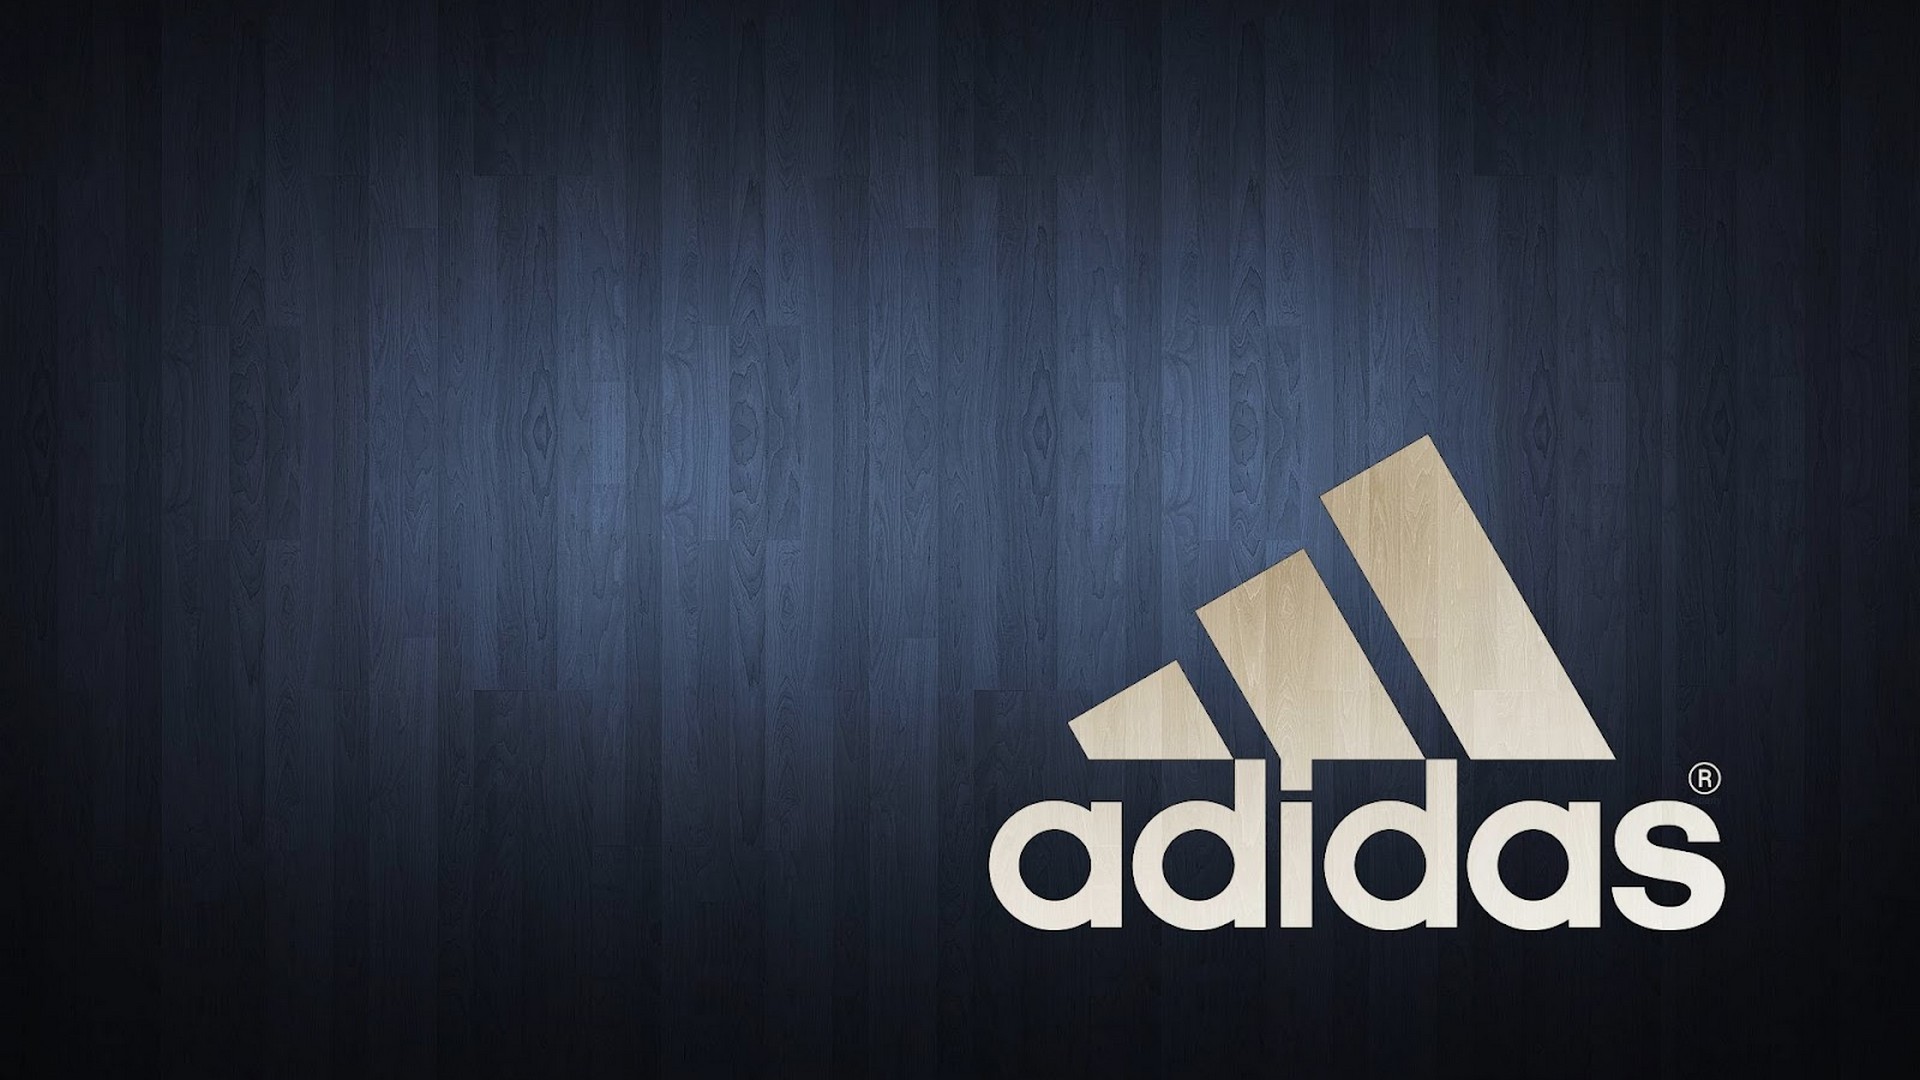 Wallpaper Logo Adidas HD with high-resolution 1920x1080 pixel. You can use this wallpaper for your Desktop Computer Backgrounds, Mac Wallpapers, Android Lock screen or iPhone Screensavers and another smartphone device